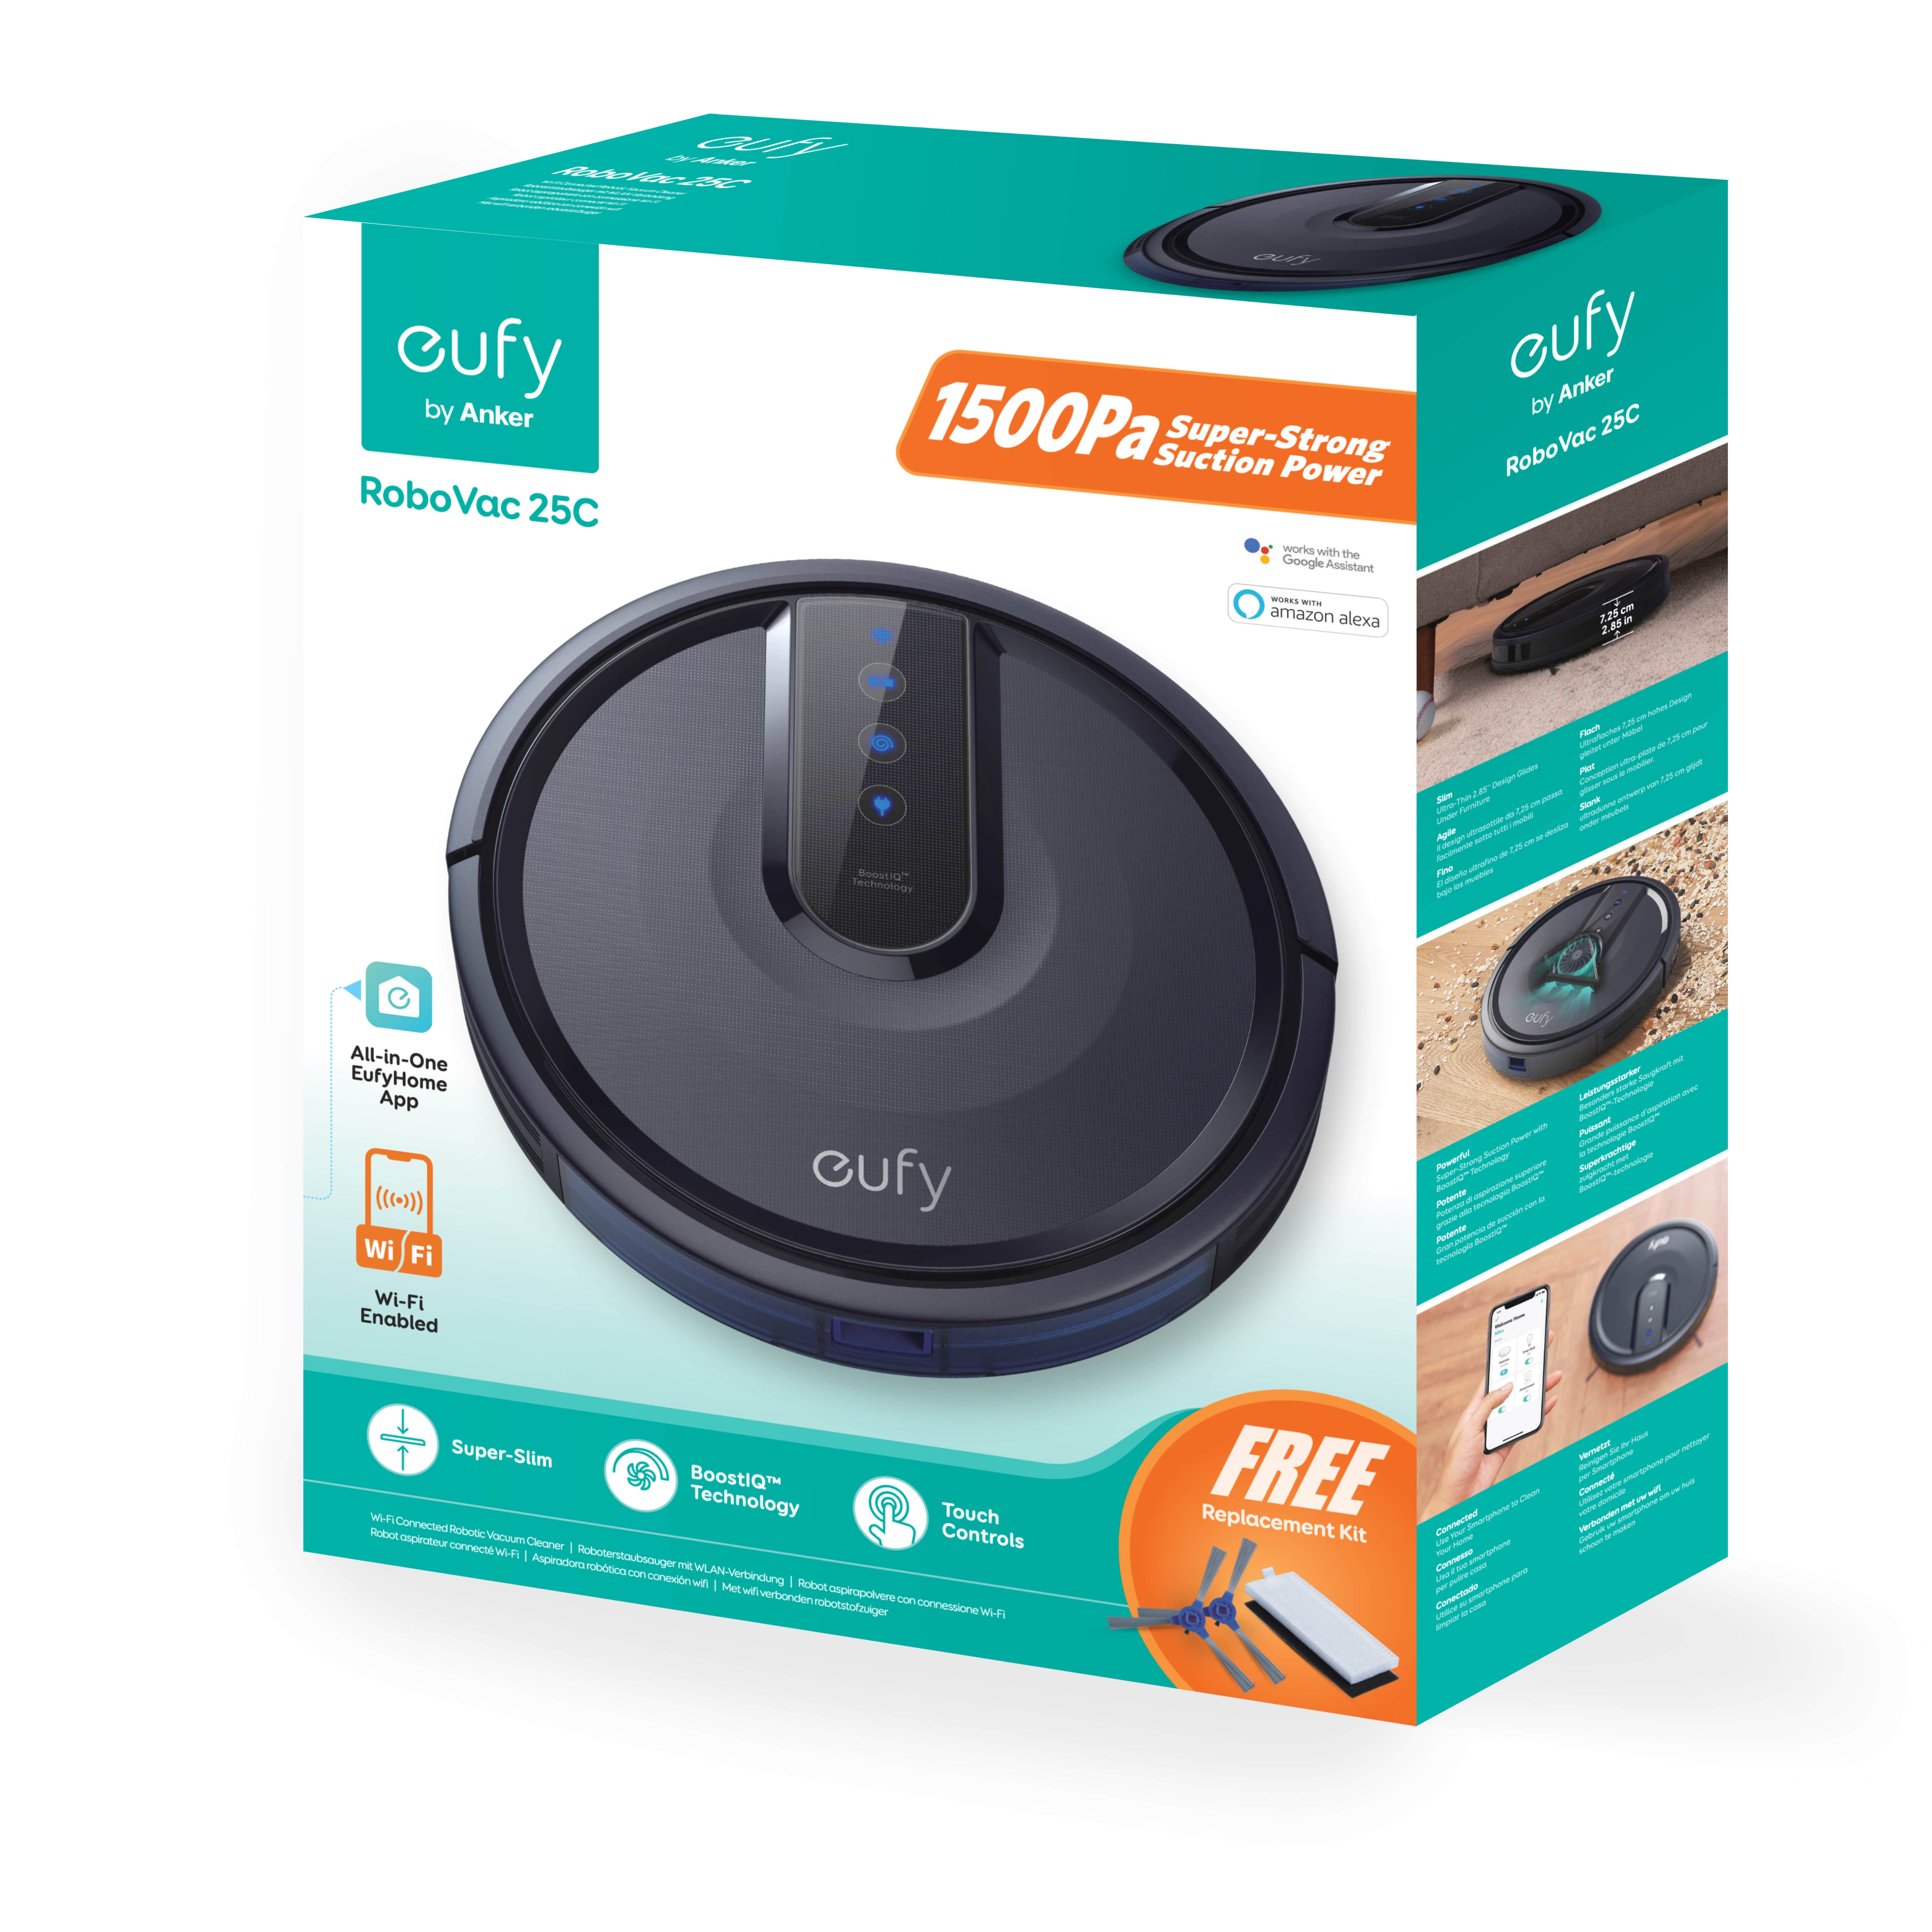 Anker eufy 25C Wi-Fi Connected Robot Vacuum, Great for Picking up Pet Hairs, Quiet, Slim - image 9 of 10